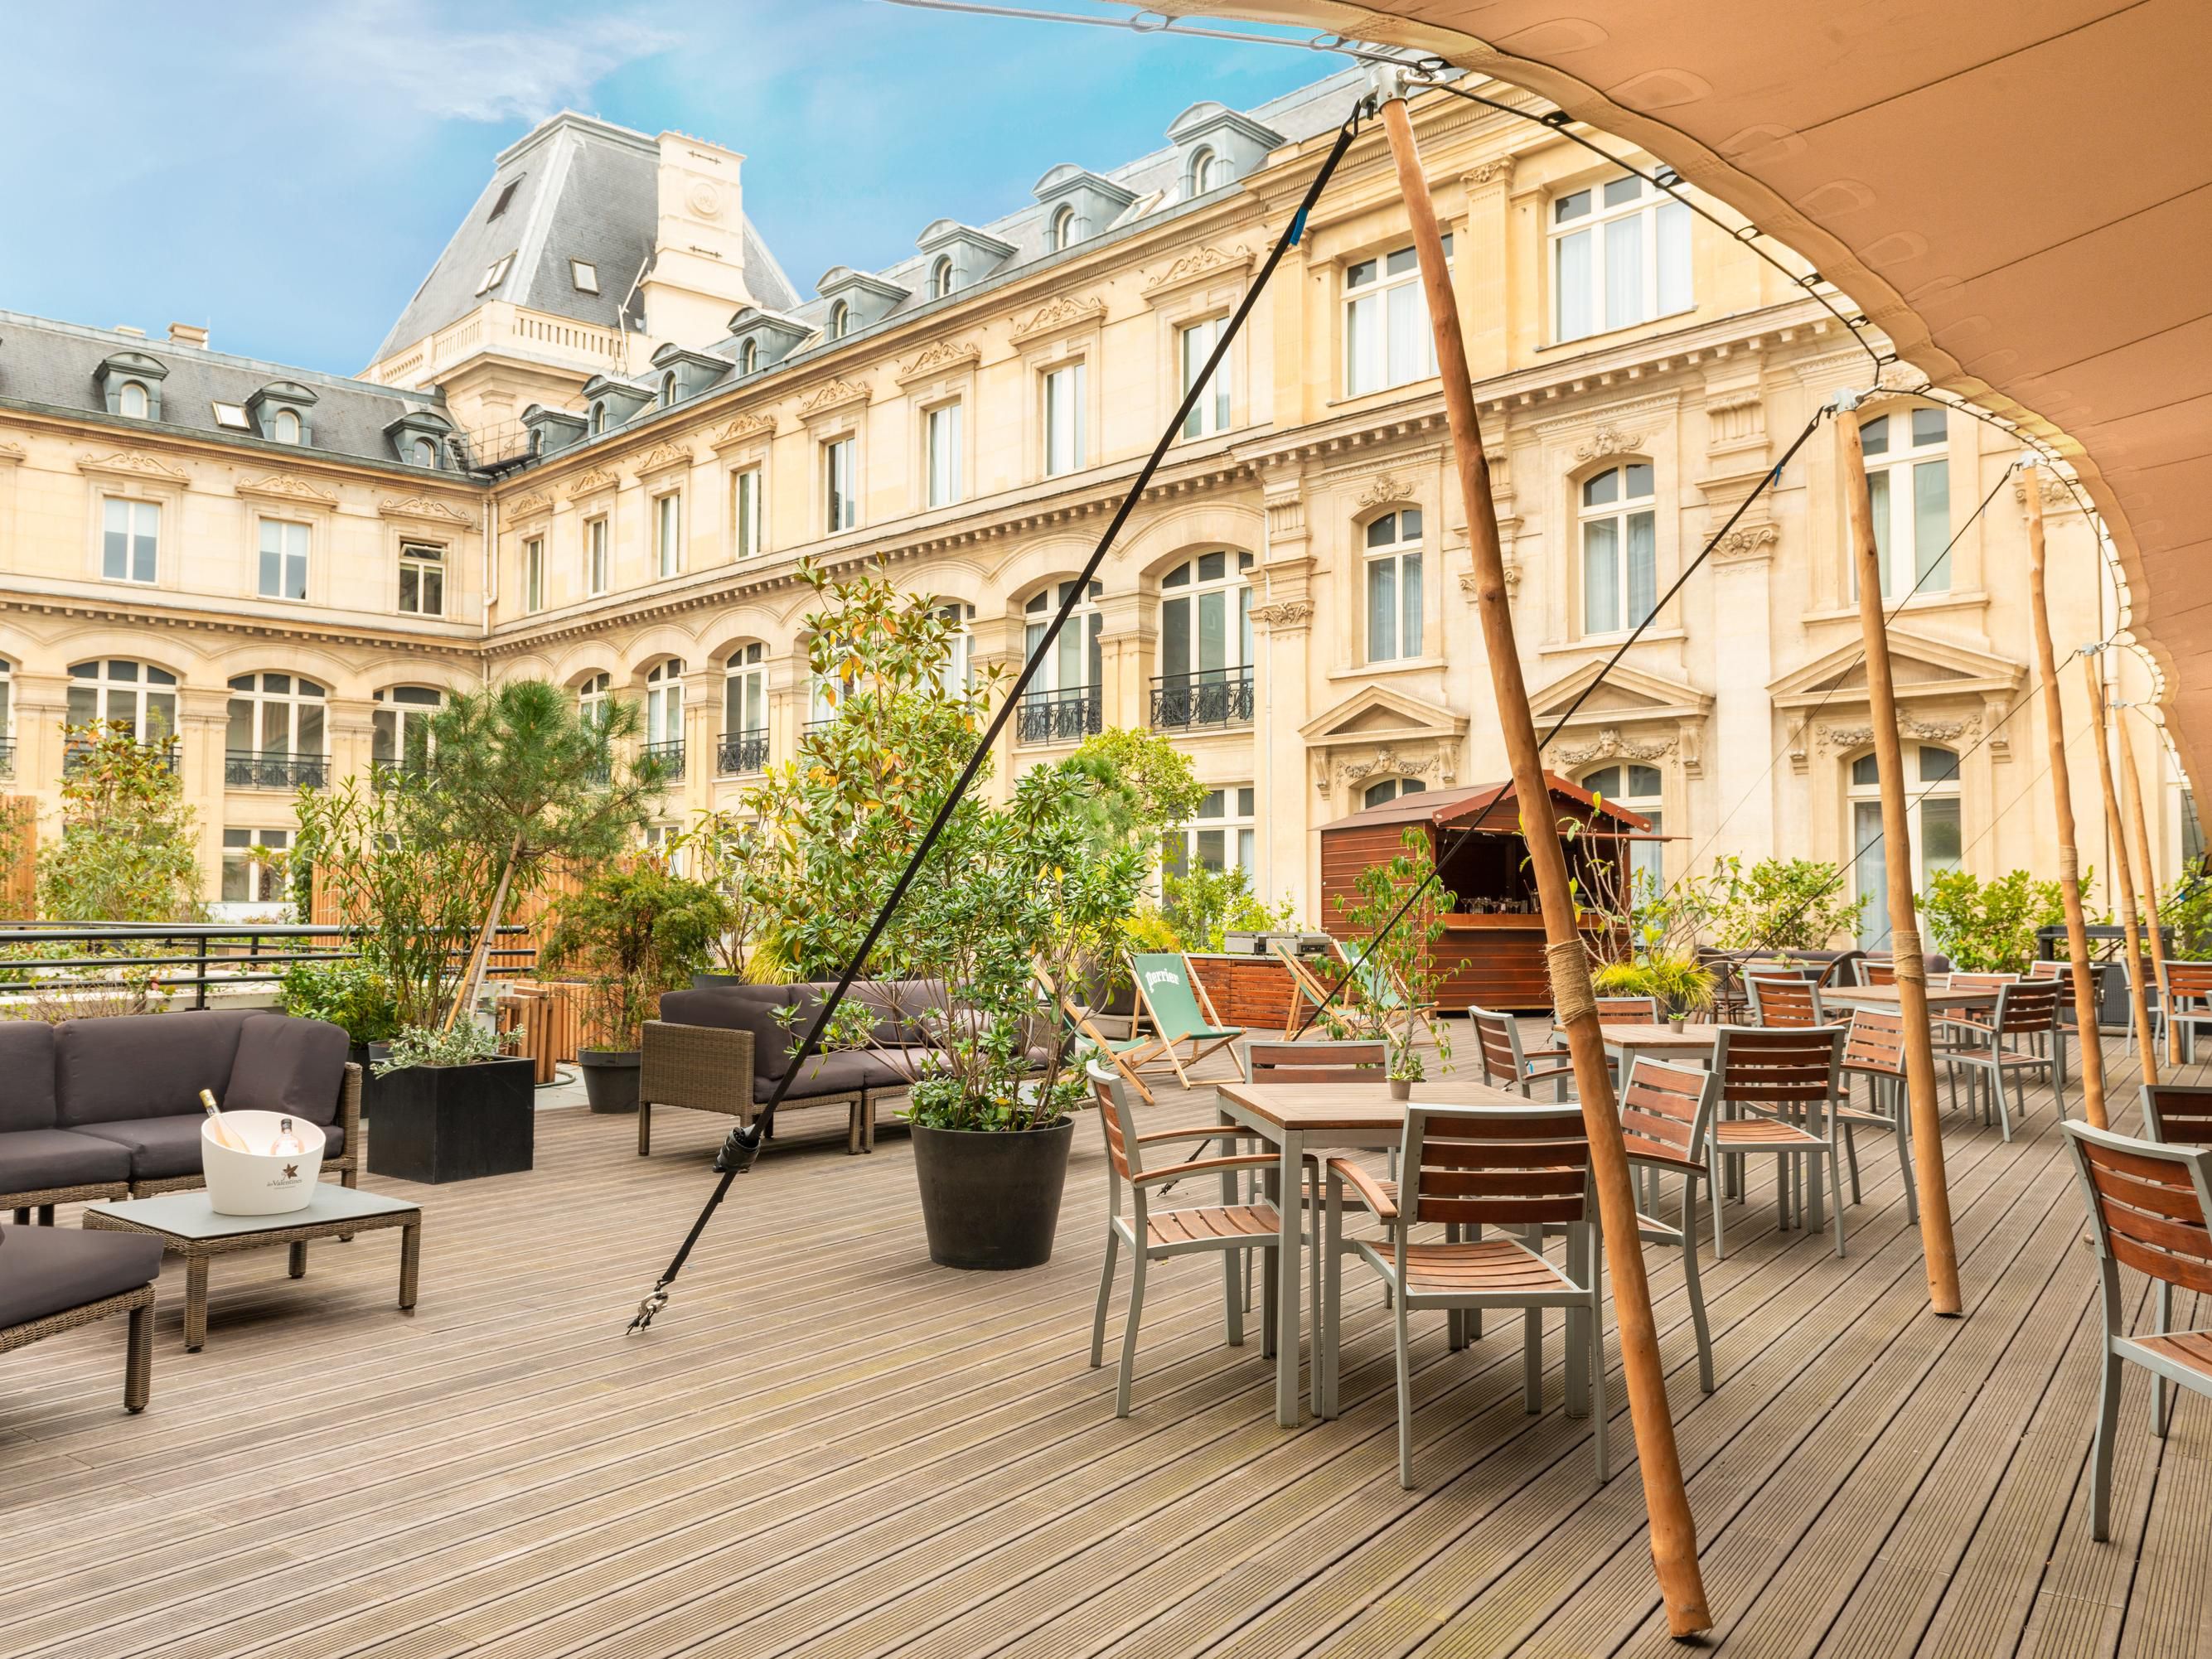 Crowne Plaza® Paris - Republique holds a hidden gem: this iconic 1200 sqm inner courtyard, away from Paris turmoil, opens its doors. It's such a heaven of peace for lunches, dinners, cocktails or anything else. It is the perfect space to spend your downtime, boosting you up for the rest of the day. Opening depends on the weather.